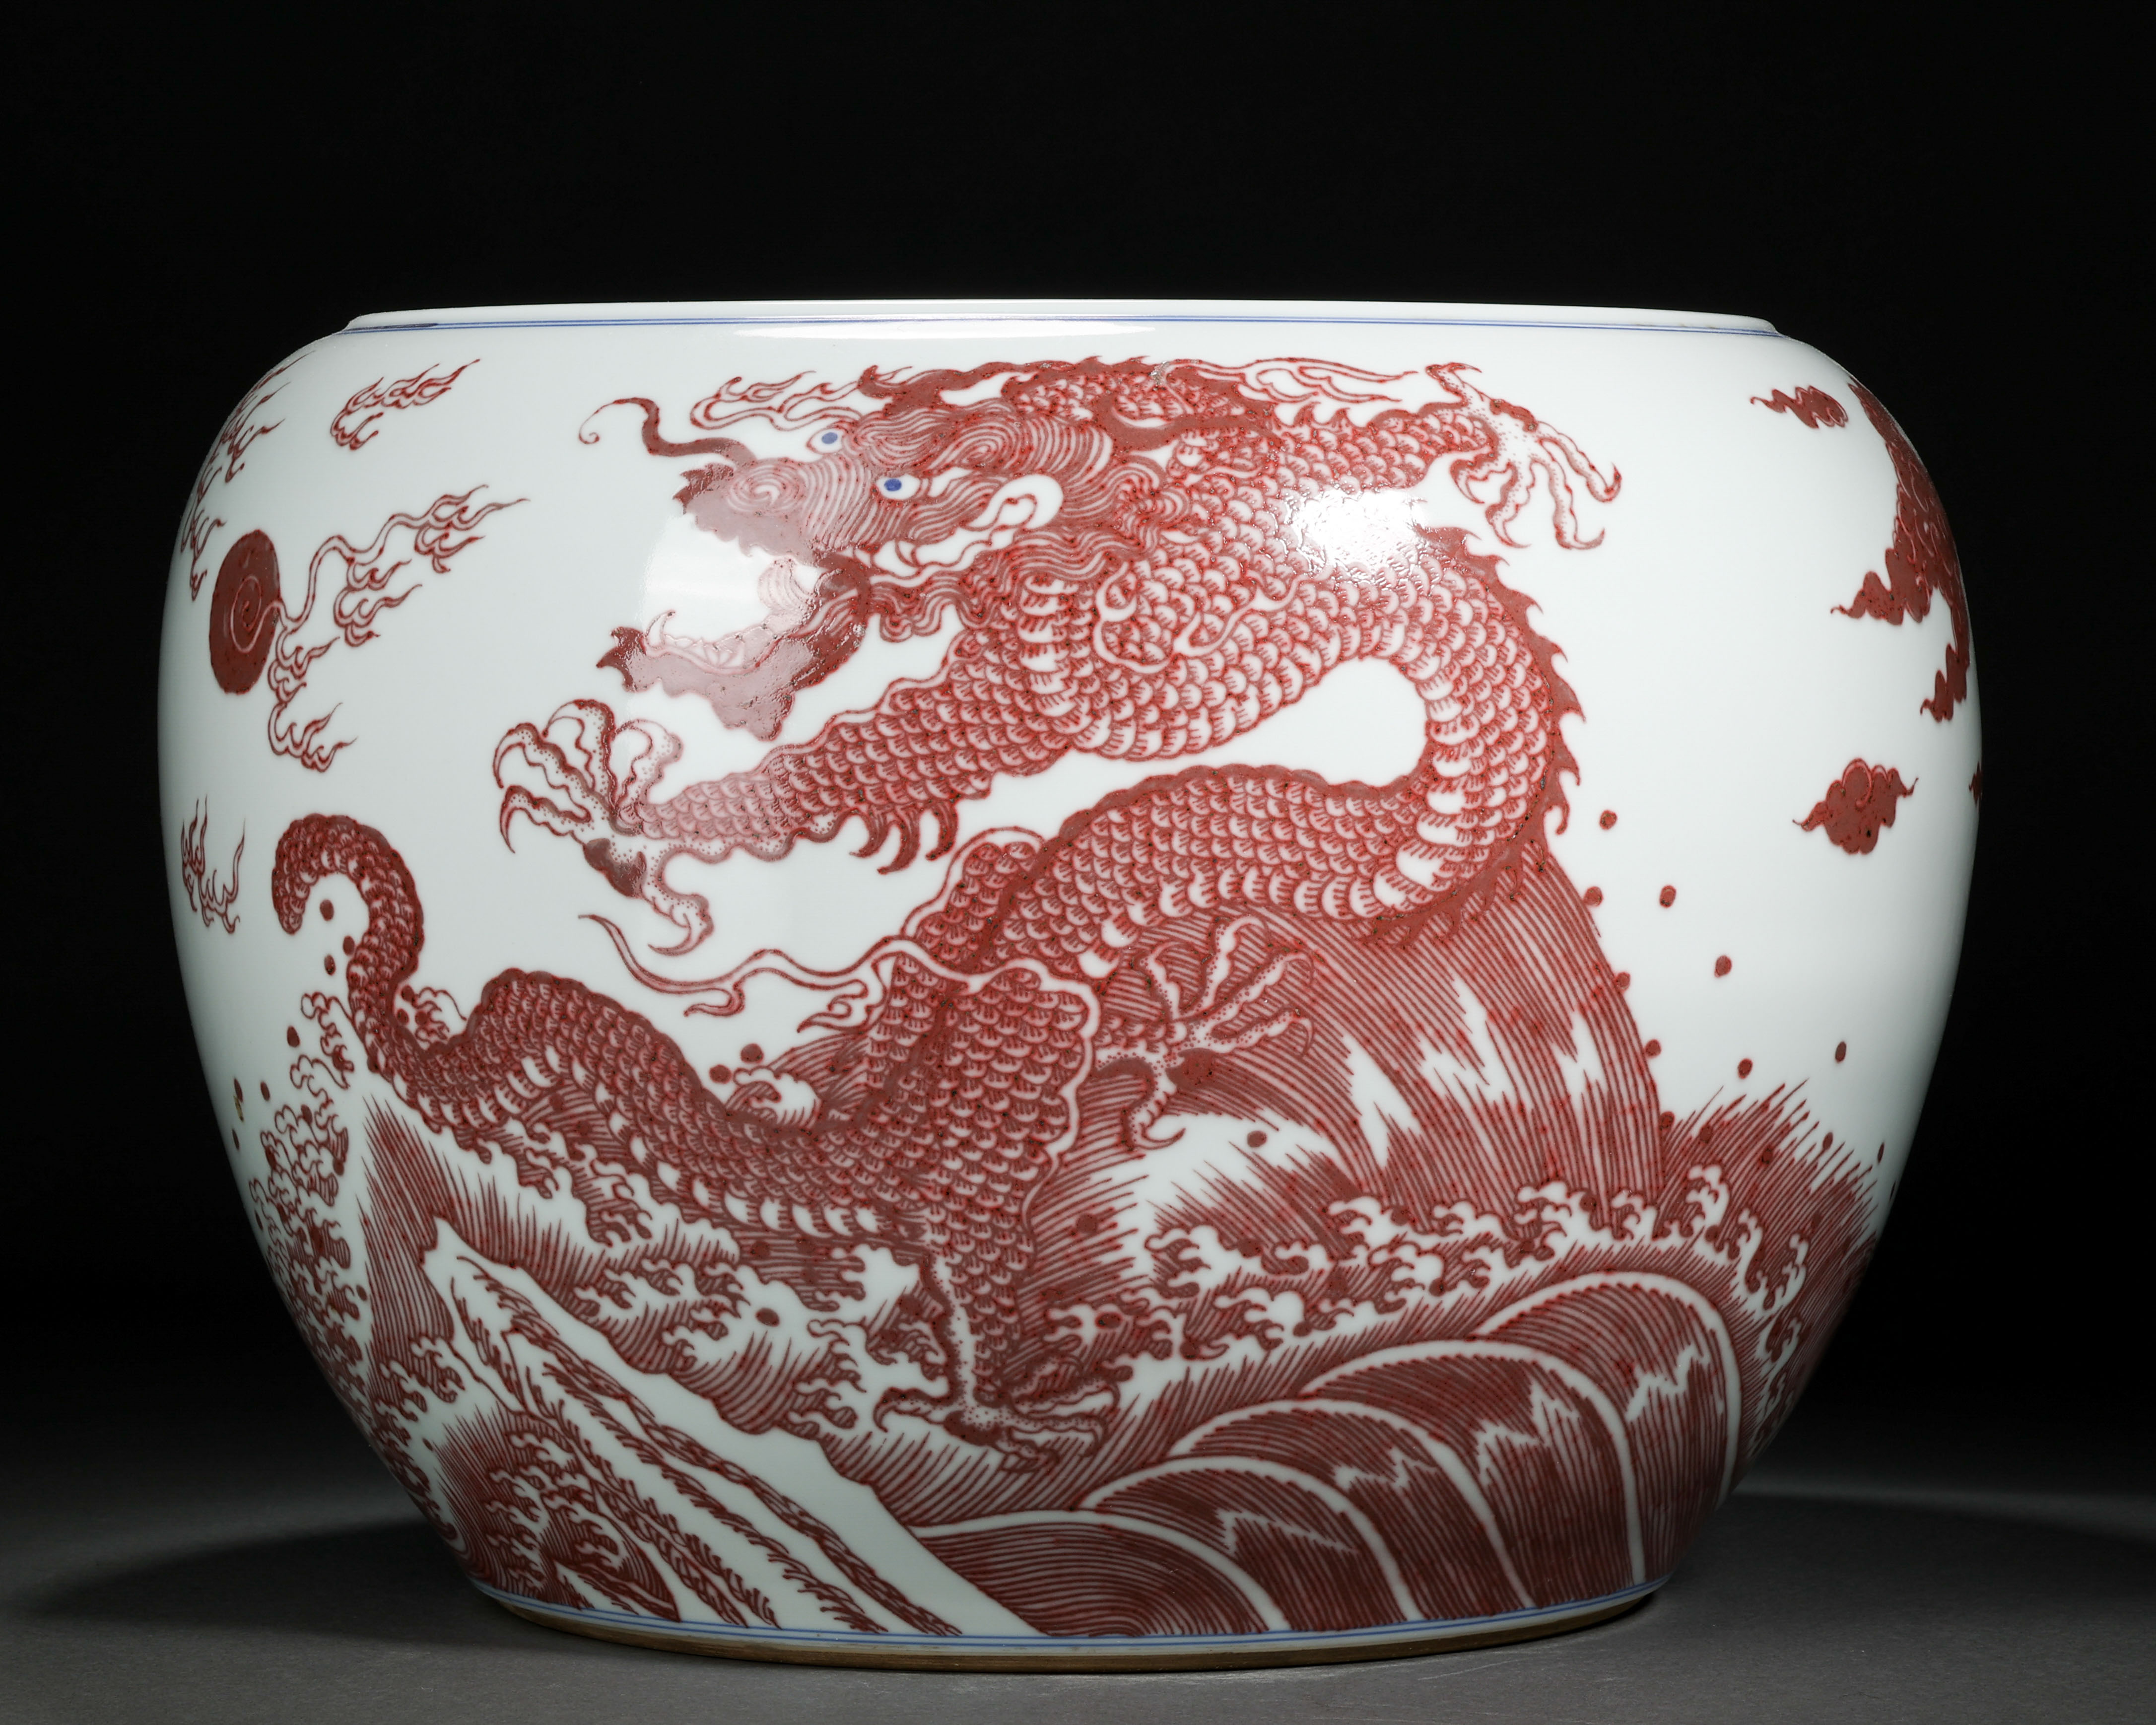 A Chinese Copper Red Dragon Jar - Image 3 of 9